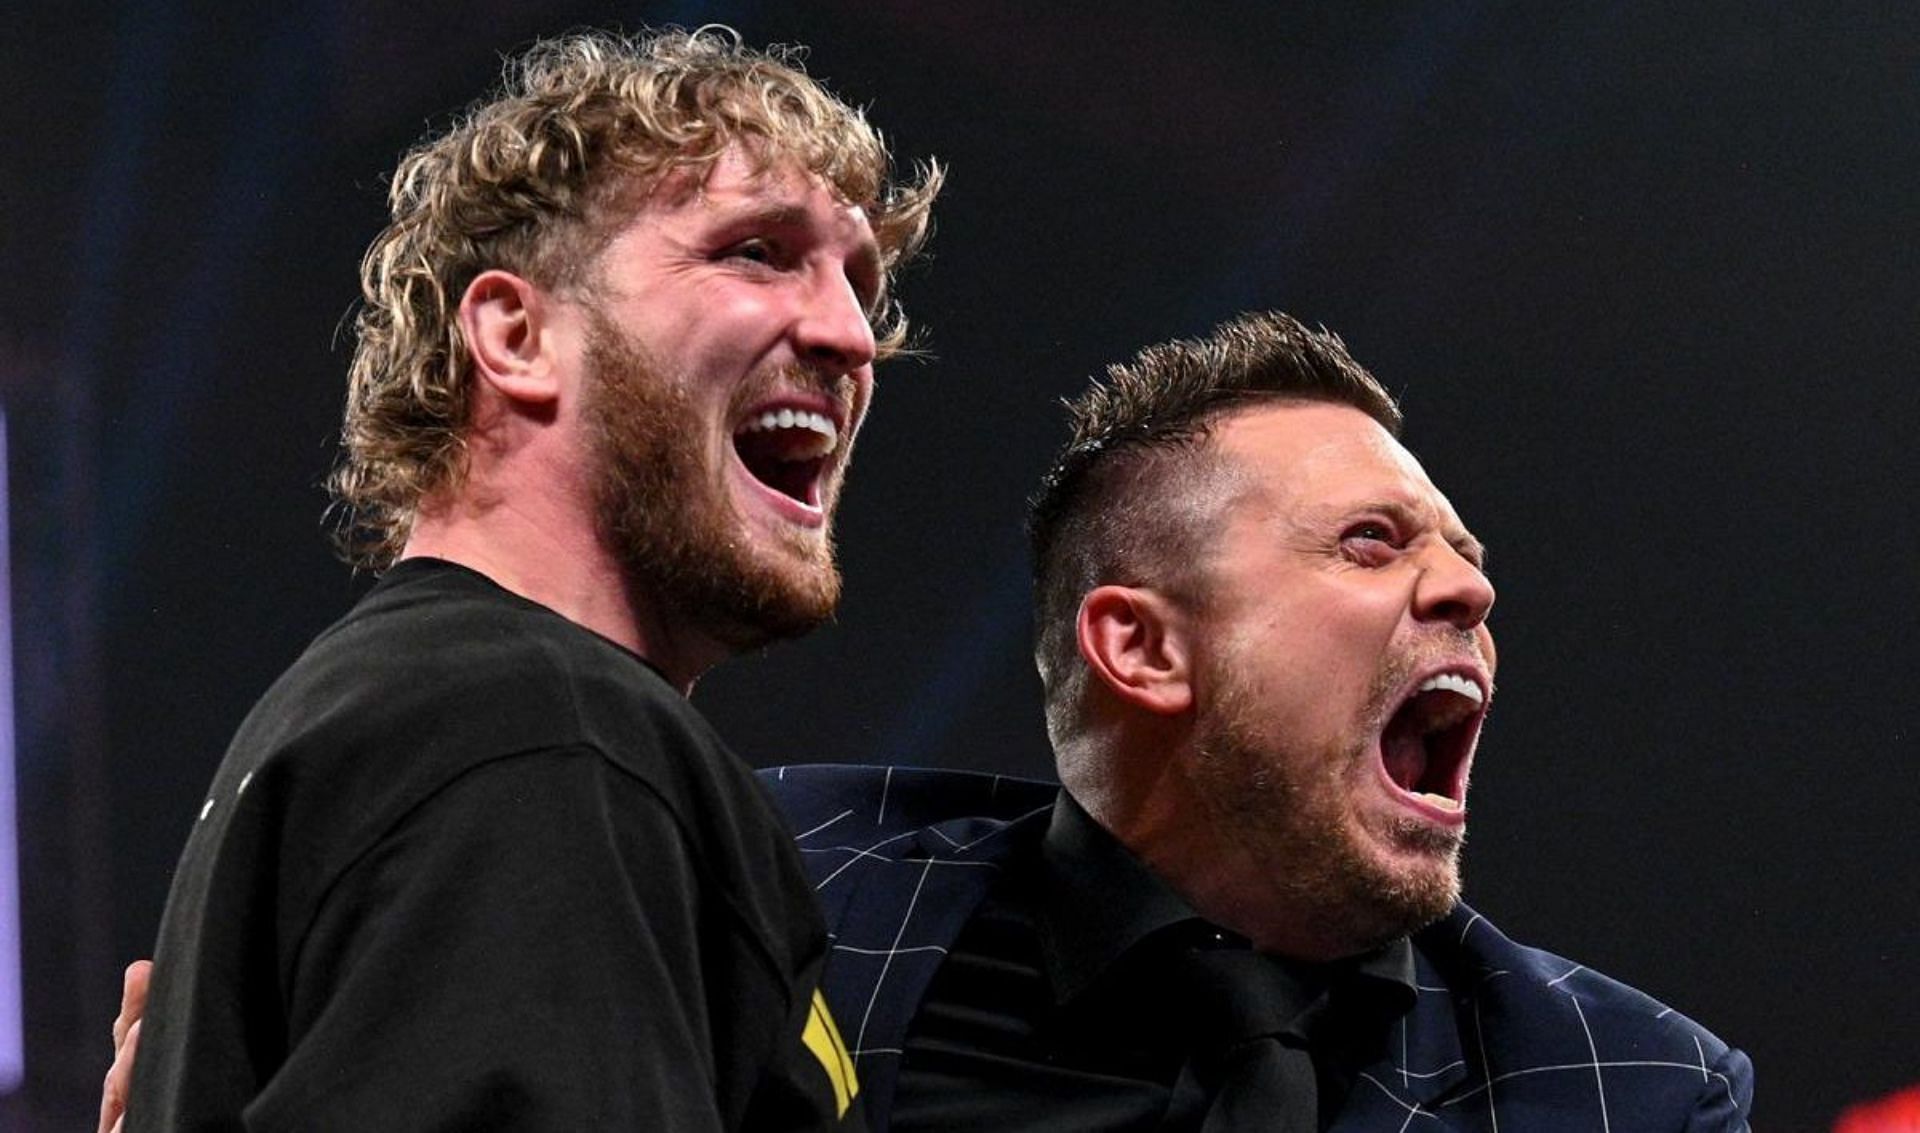 The Miz is impressed with Logan Paul as he trains for WrestleMania.